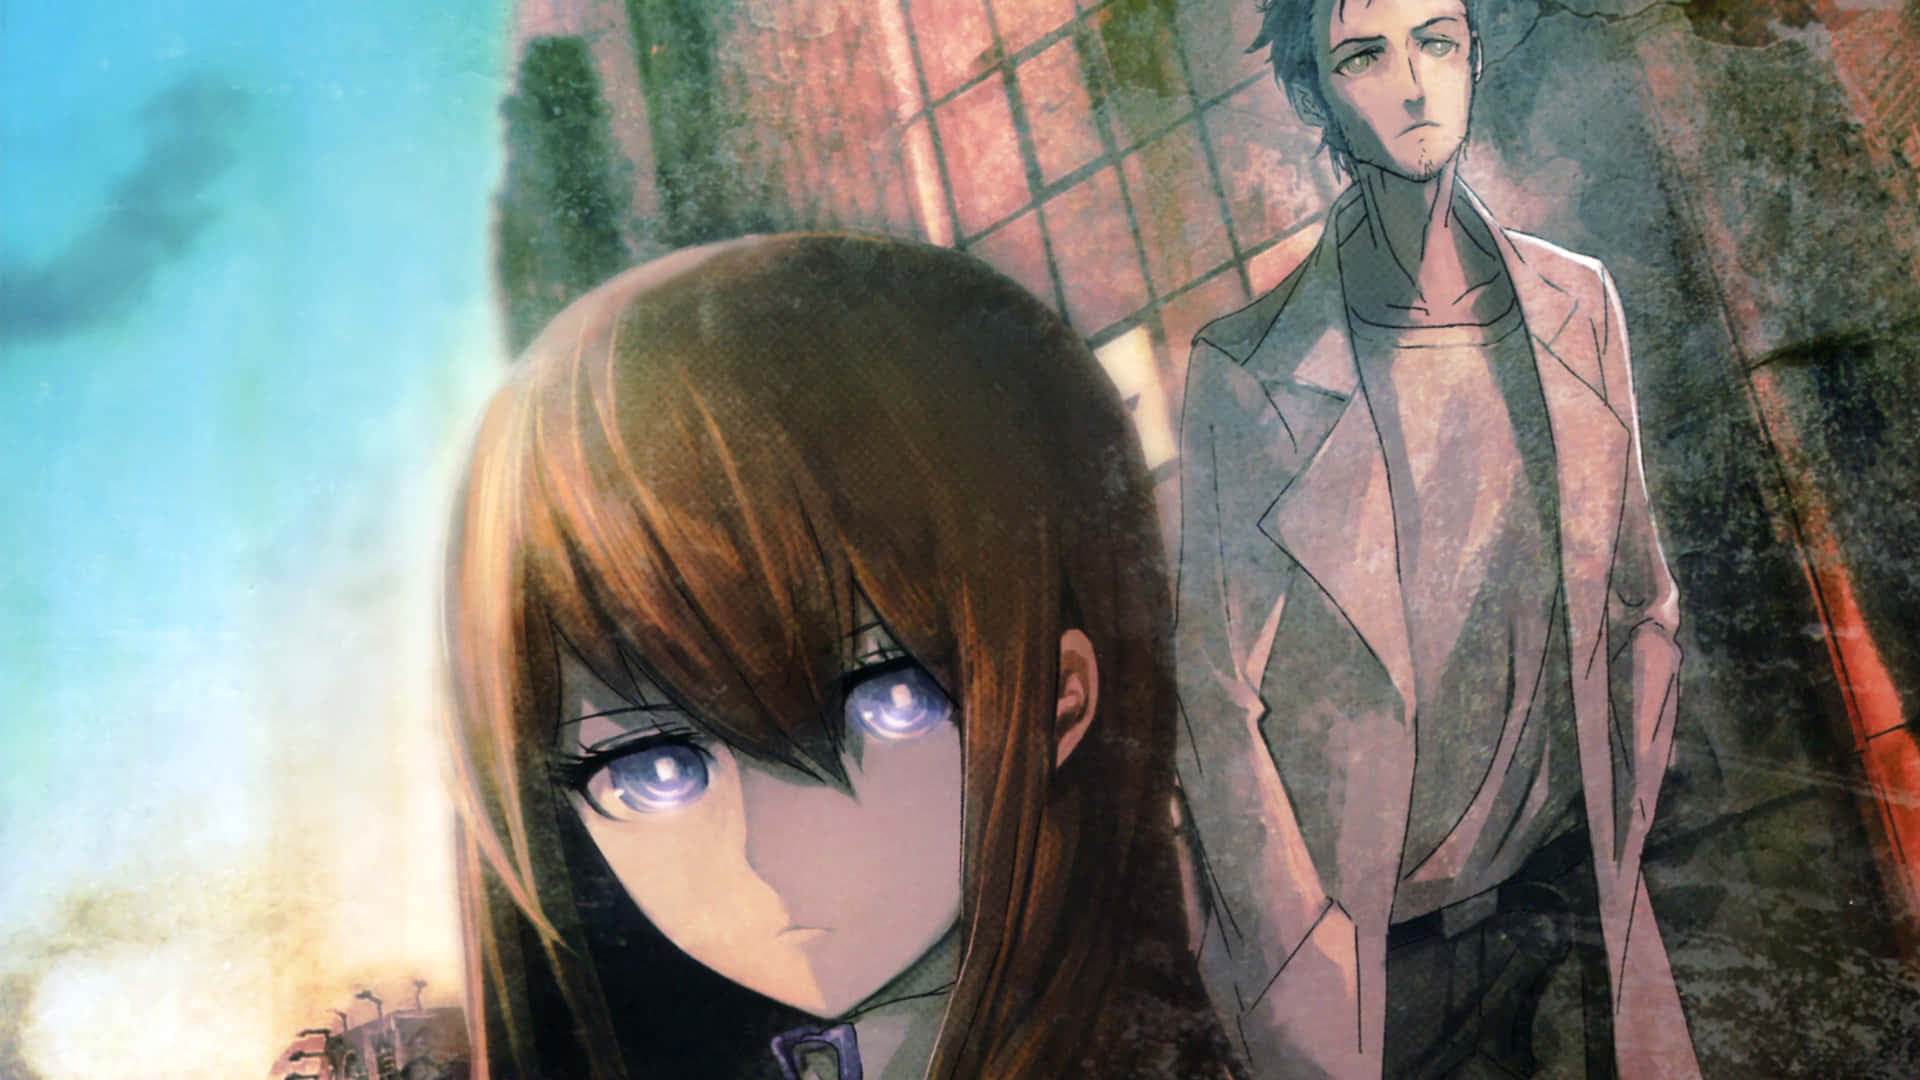 Cross Of Timelines In Steins Gate Universe.